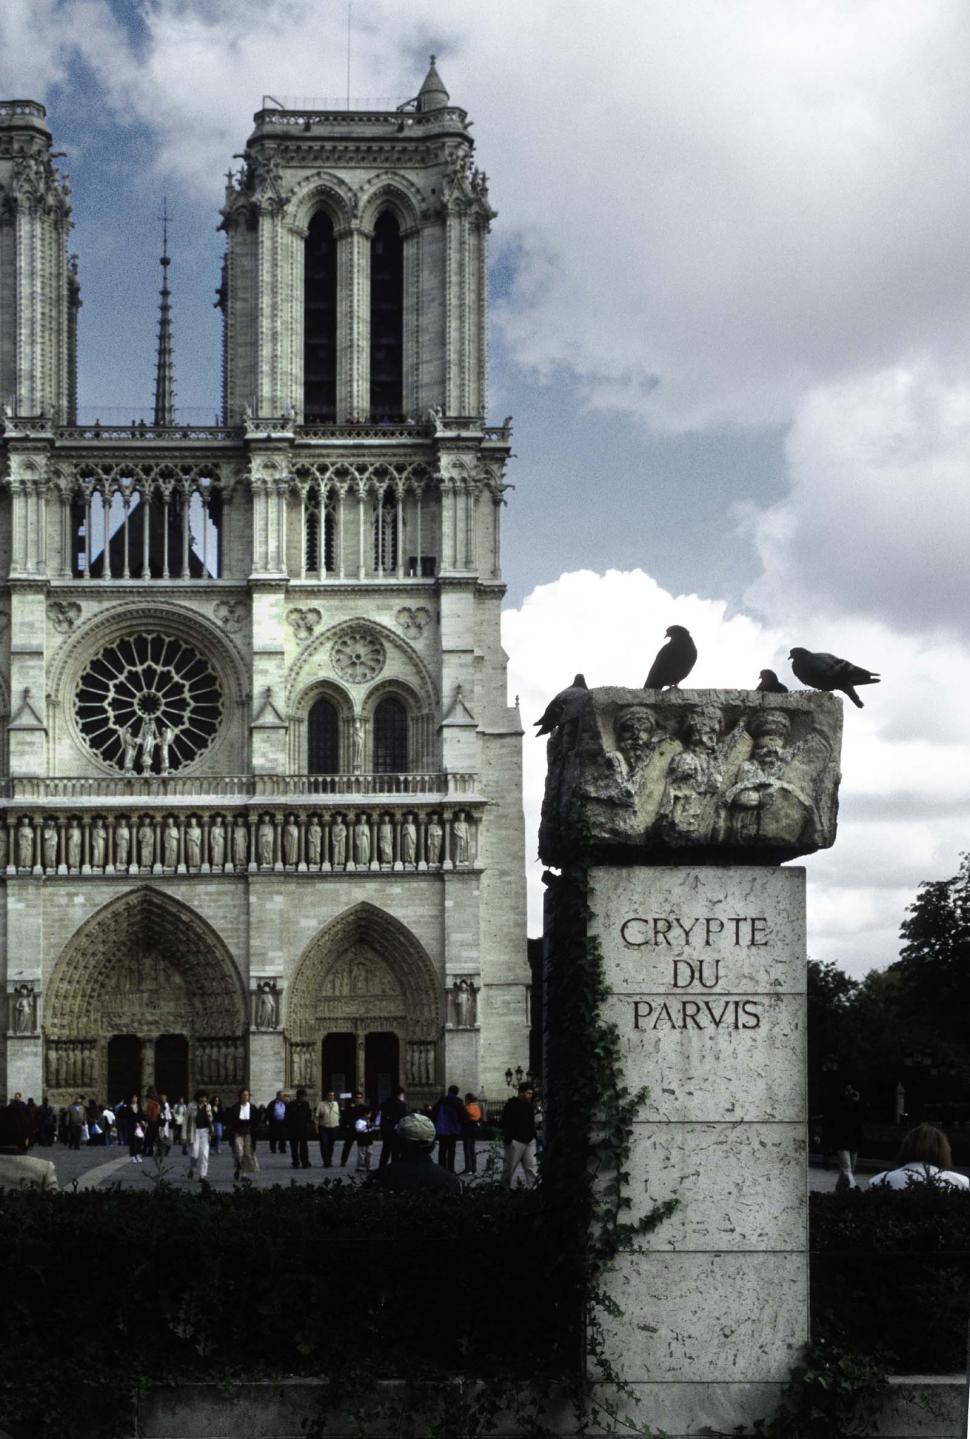 Free Image of france notre dame gothic cathedral landmark crypt crypte du paris birds spooky french historic creepy underground europe european paris scary 